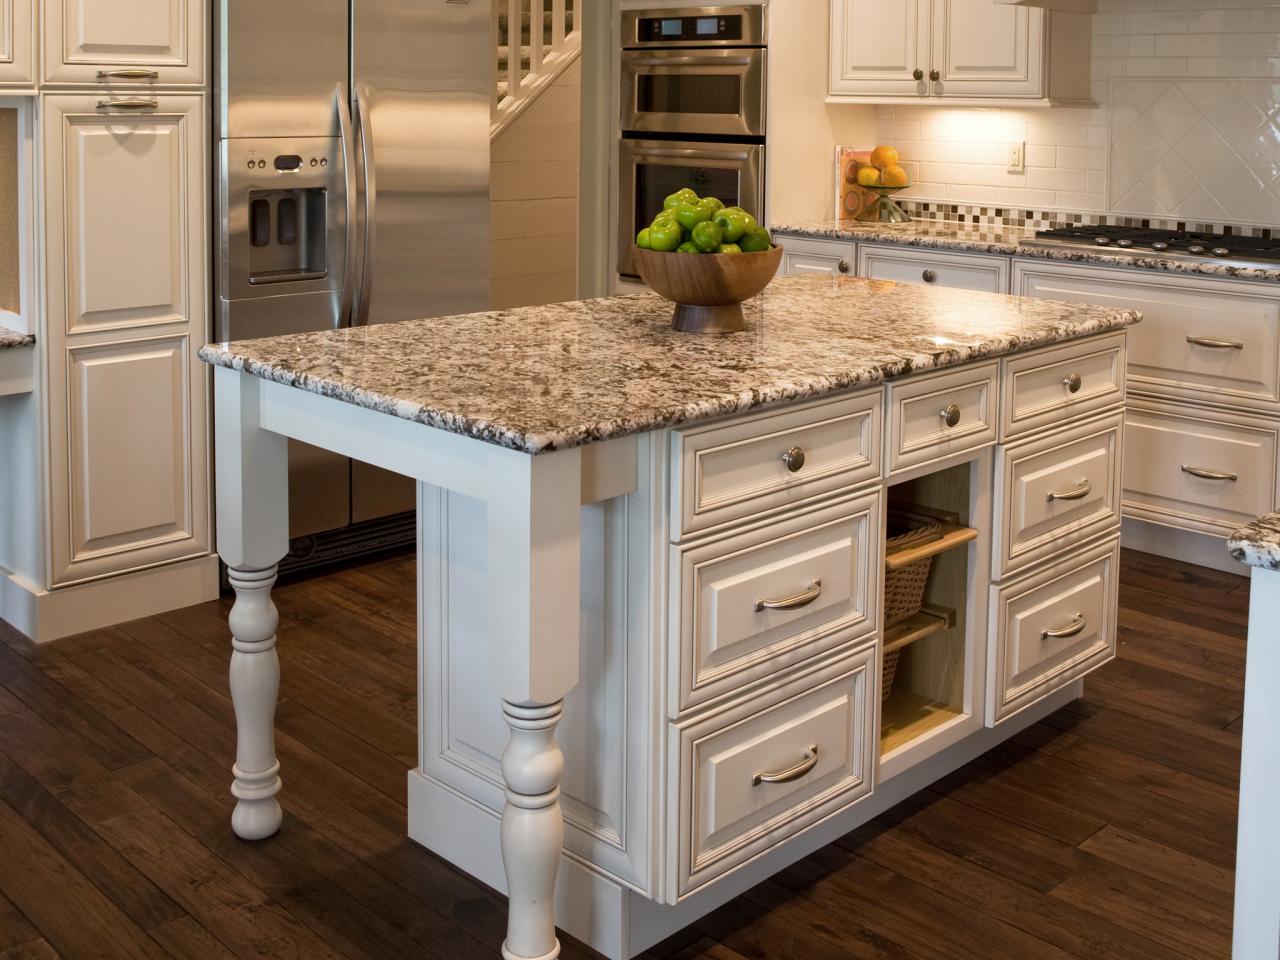 Incredible Island Countertop Ideas: Why You Should Change Your Kitchen  Island Countertop - International Granite And Stone®